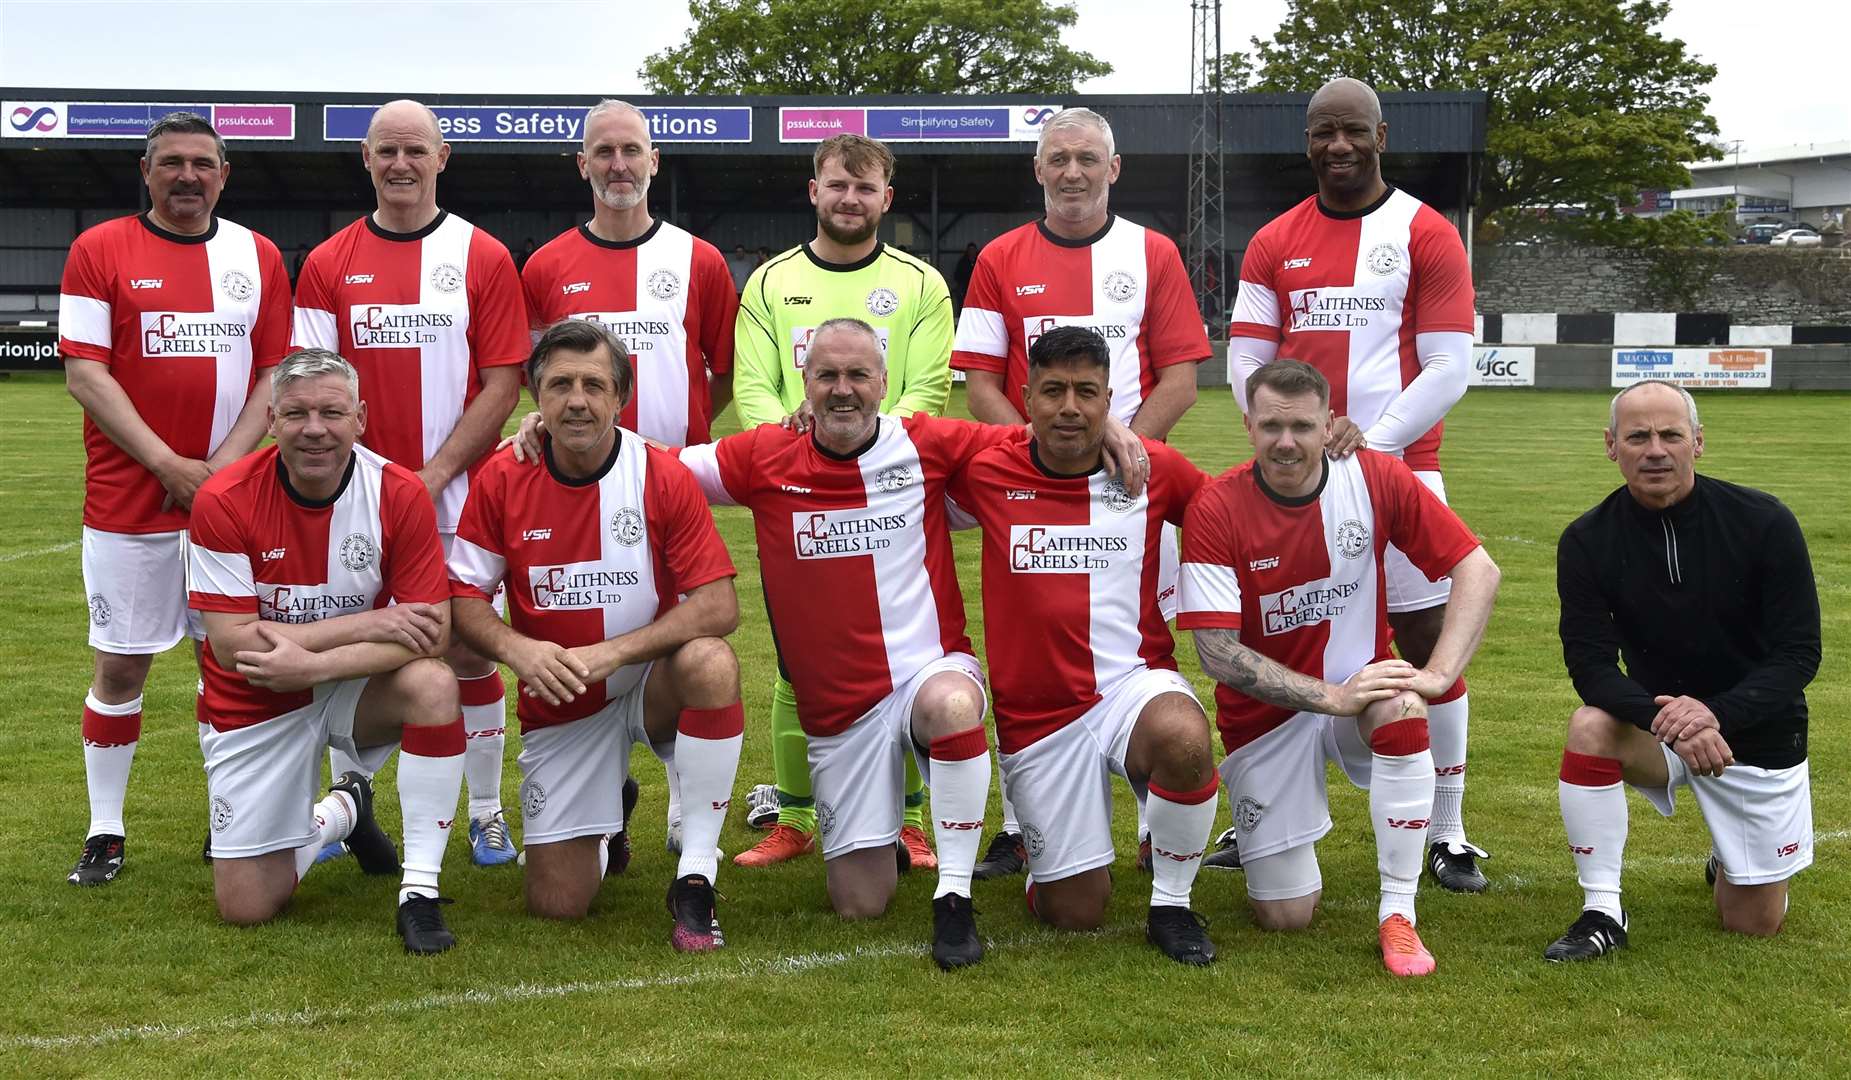 The SPL Legends lining up before Saturday's match at Harmsworth Park. Picture: Mel Roger